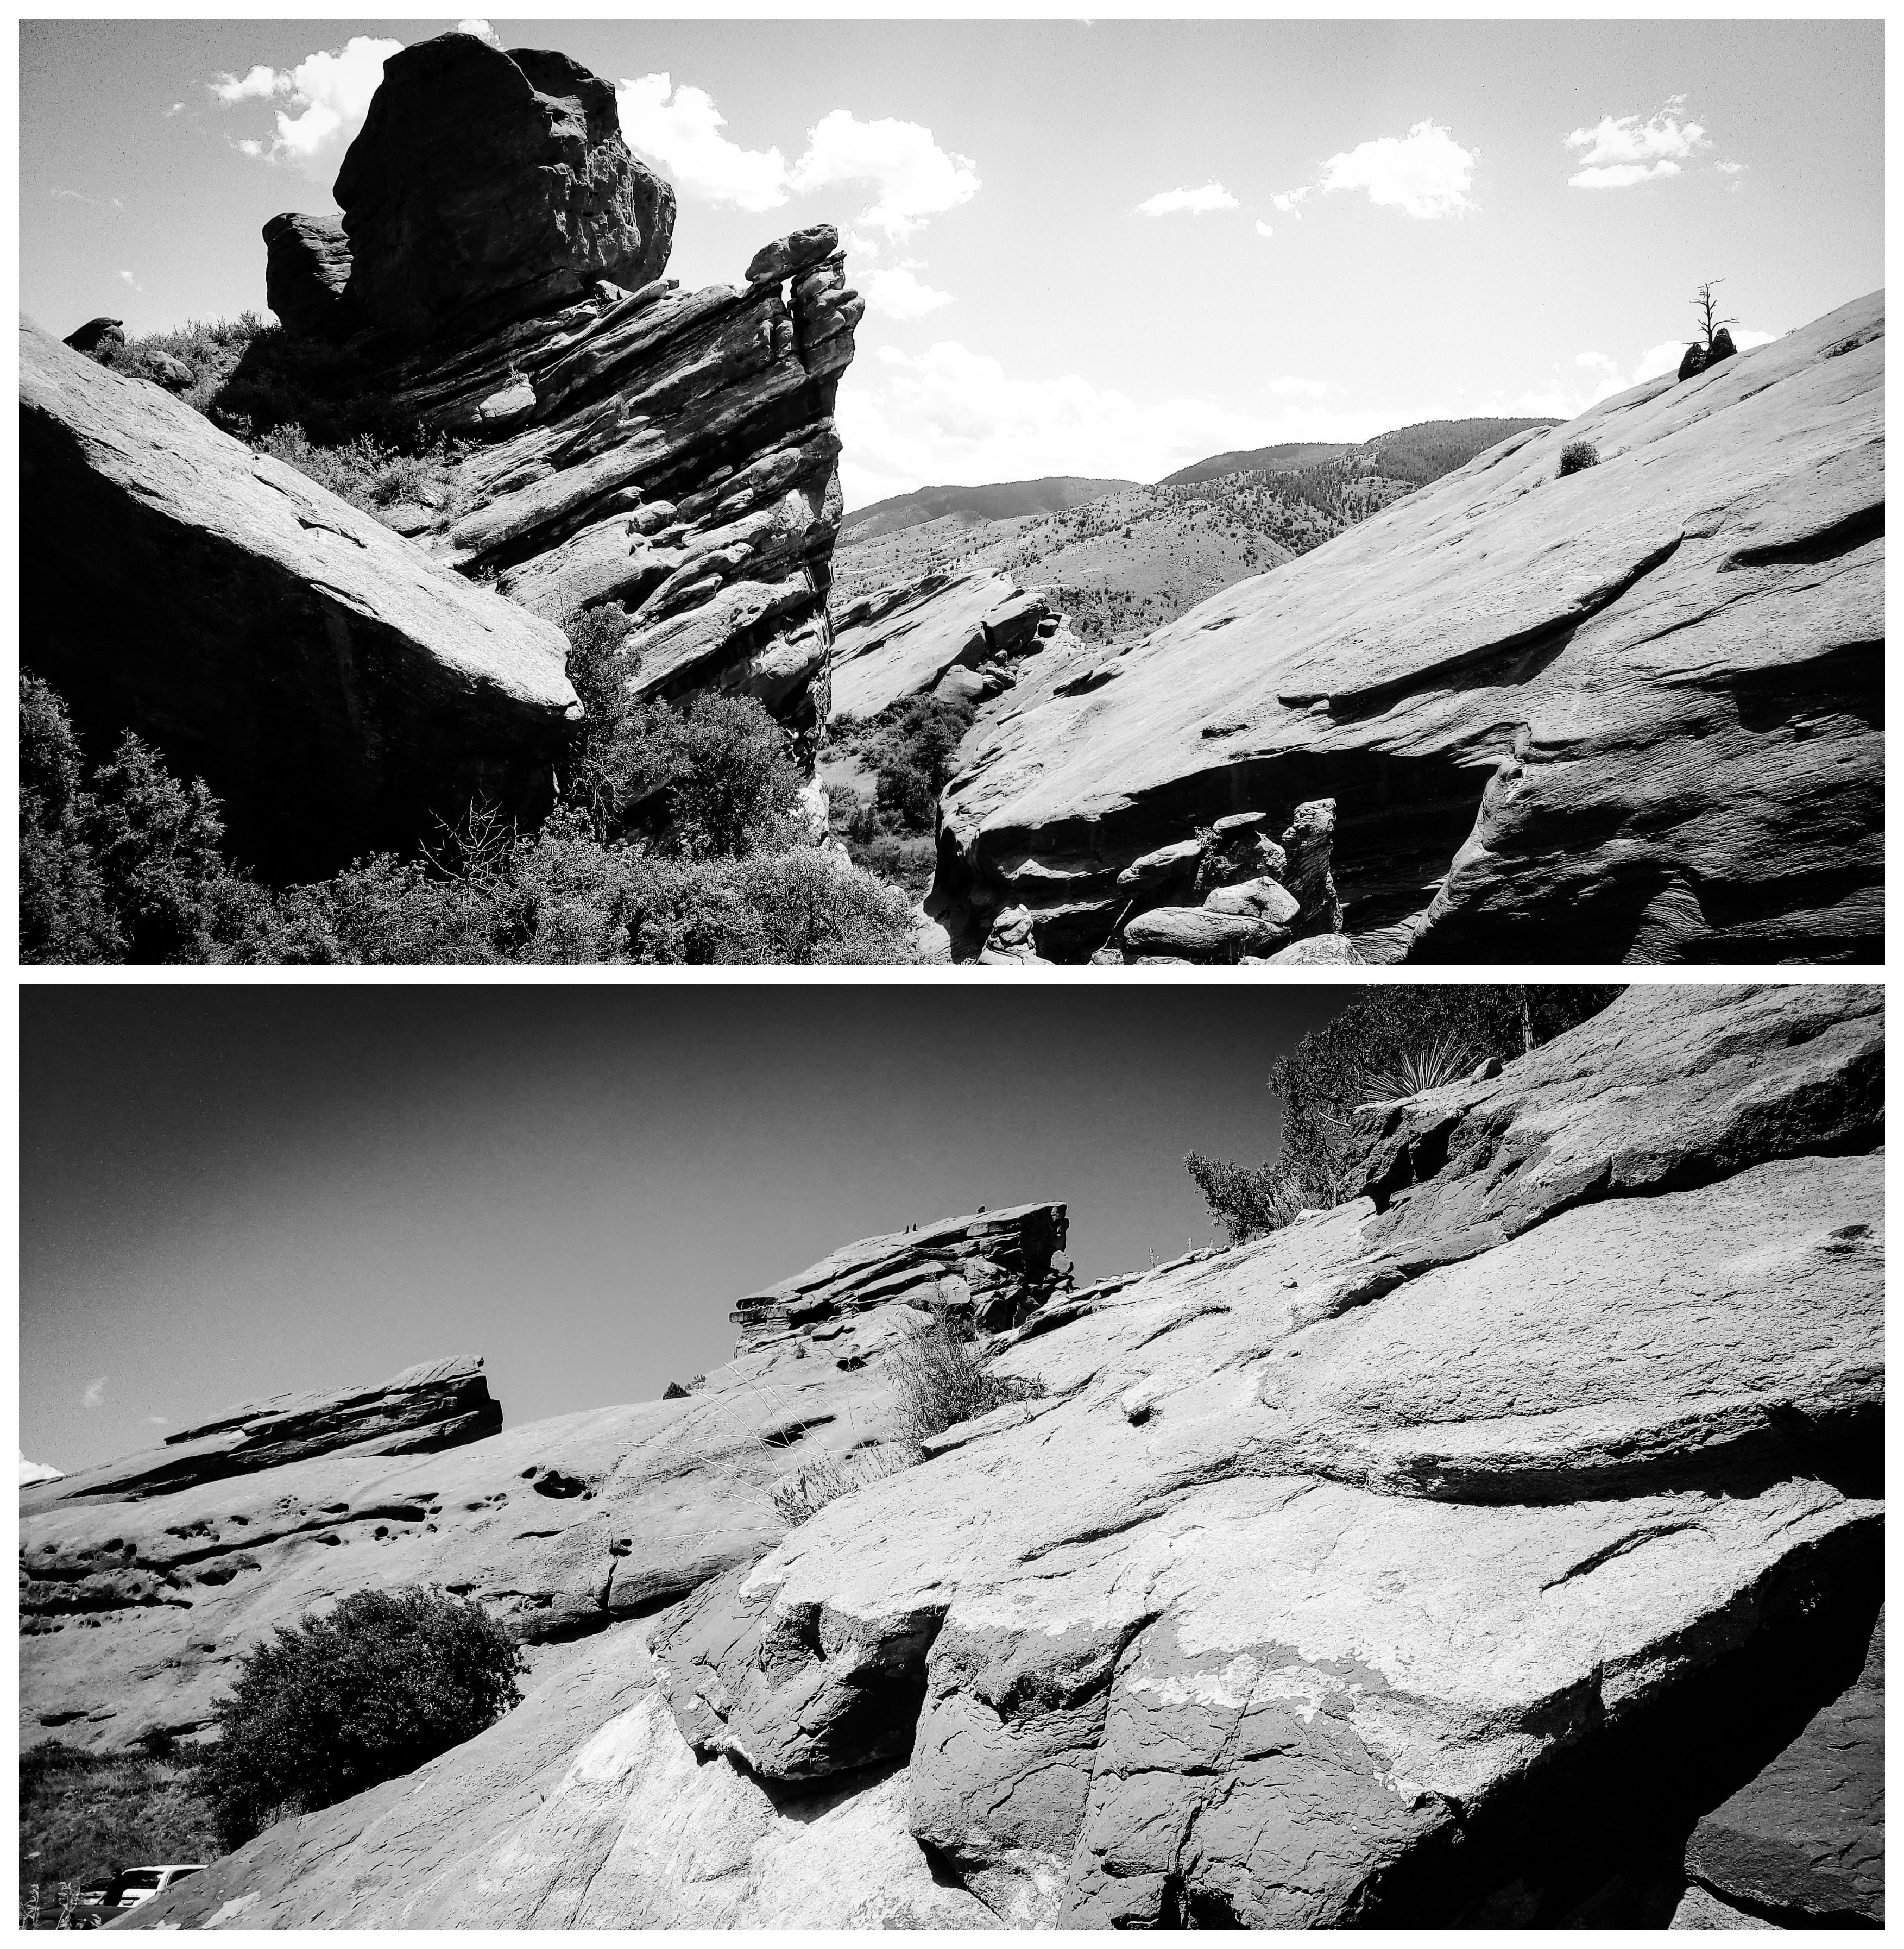 Nature Photos B&W - Nr Morrison, Colorado, US. ‘Red Rocks Park.’ The rock formations are over 200 million years old. sketchbookexplorer.com @davidasutton @sketchbookexplorer Facebook.com/davidanthonysutton #redrocksparkcolorado #colorado #redrocksamphitheatre #unitedstates #USA #travel #travelblog #photography #nature #wildwest